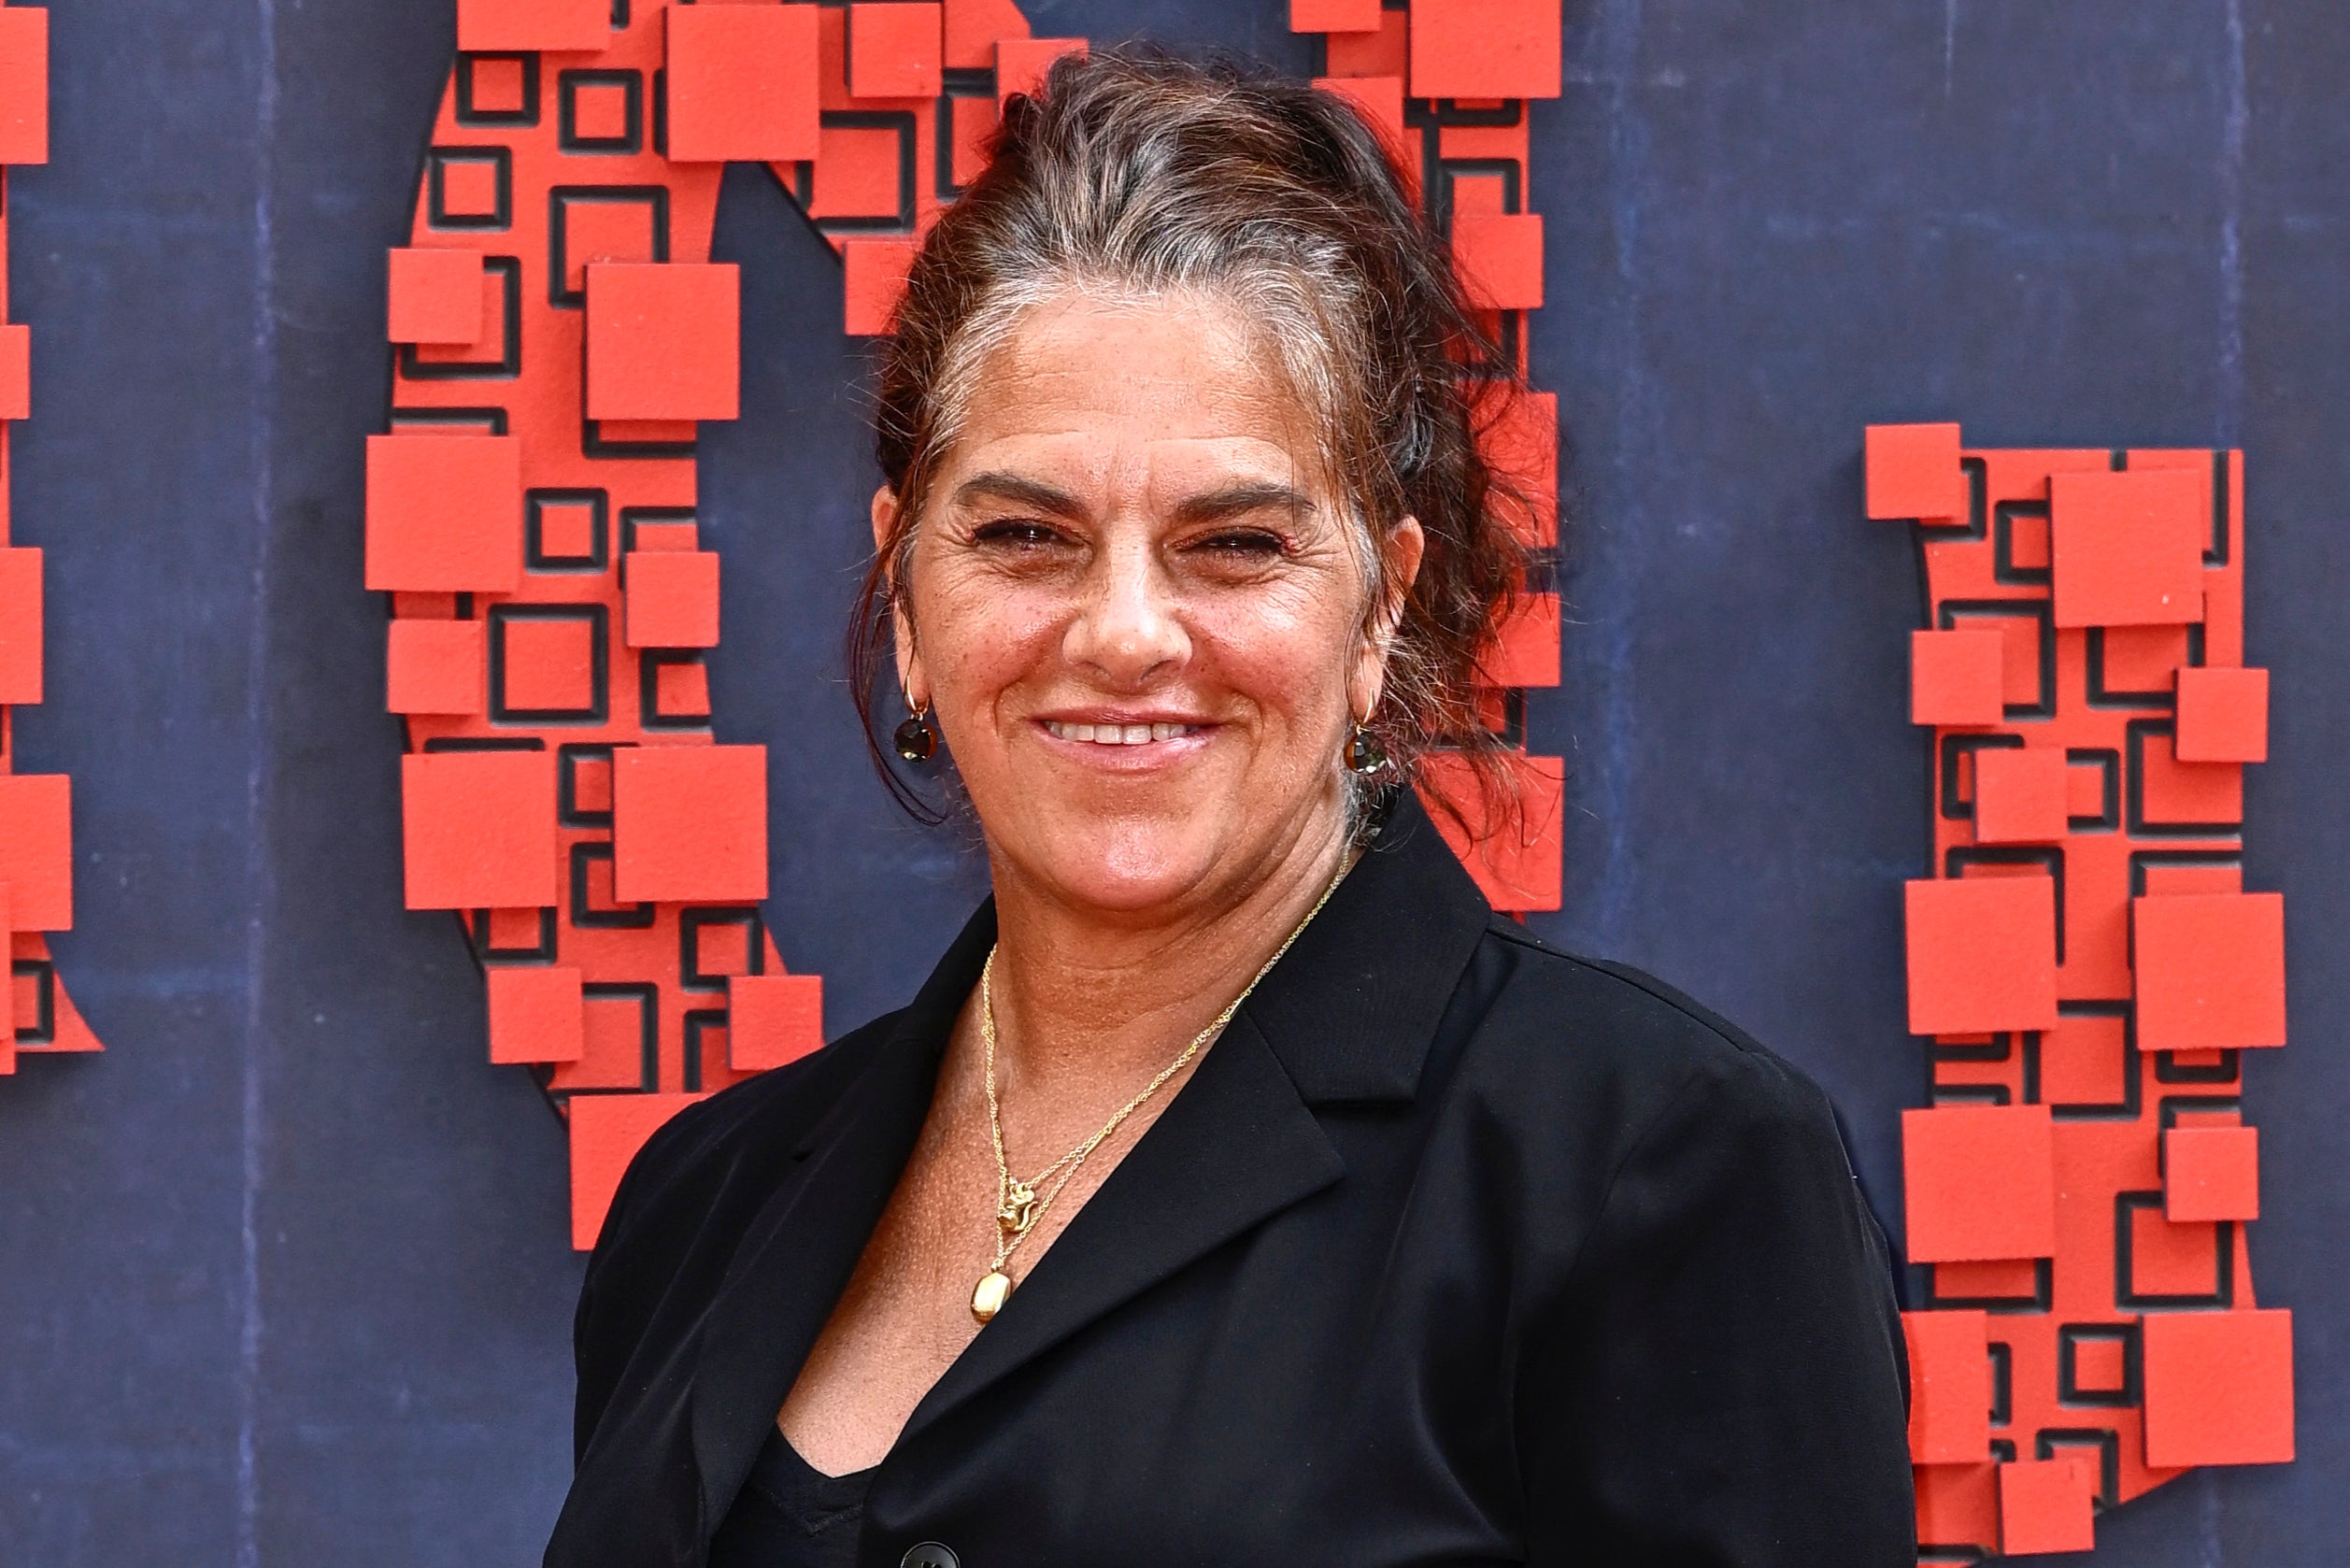 Tracey Emin is known for her autobiographical and confessional artwork